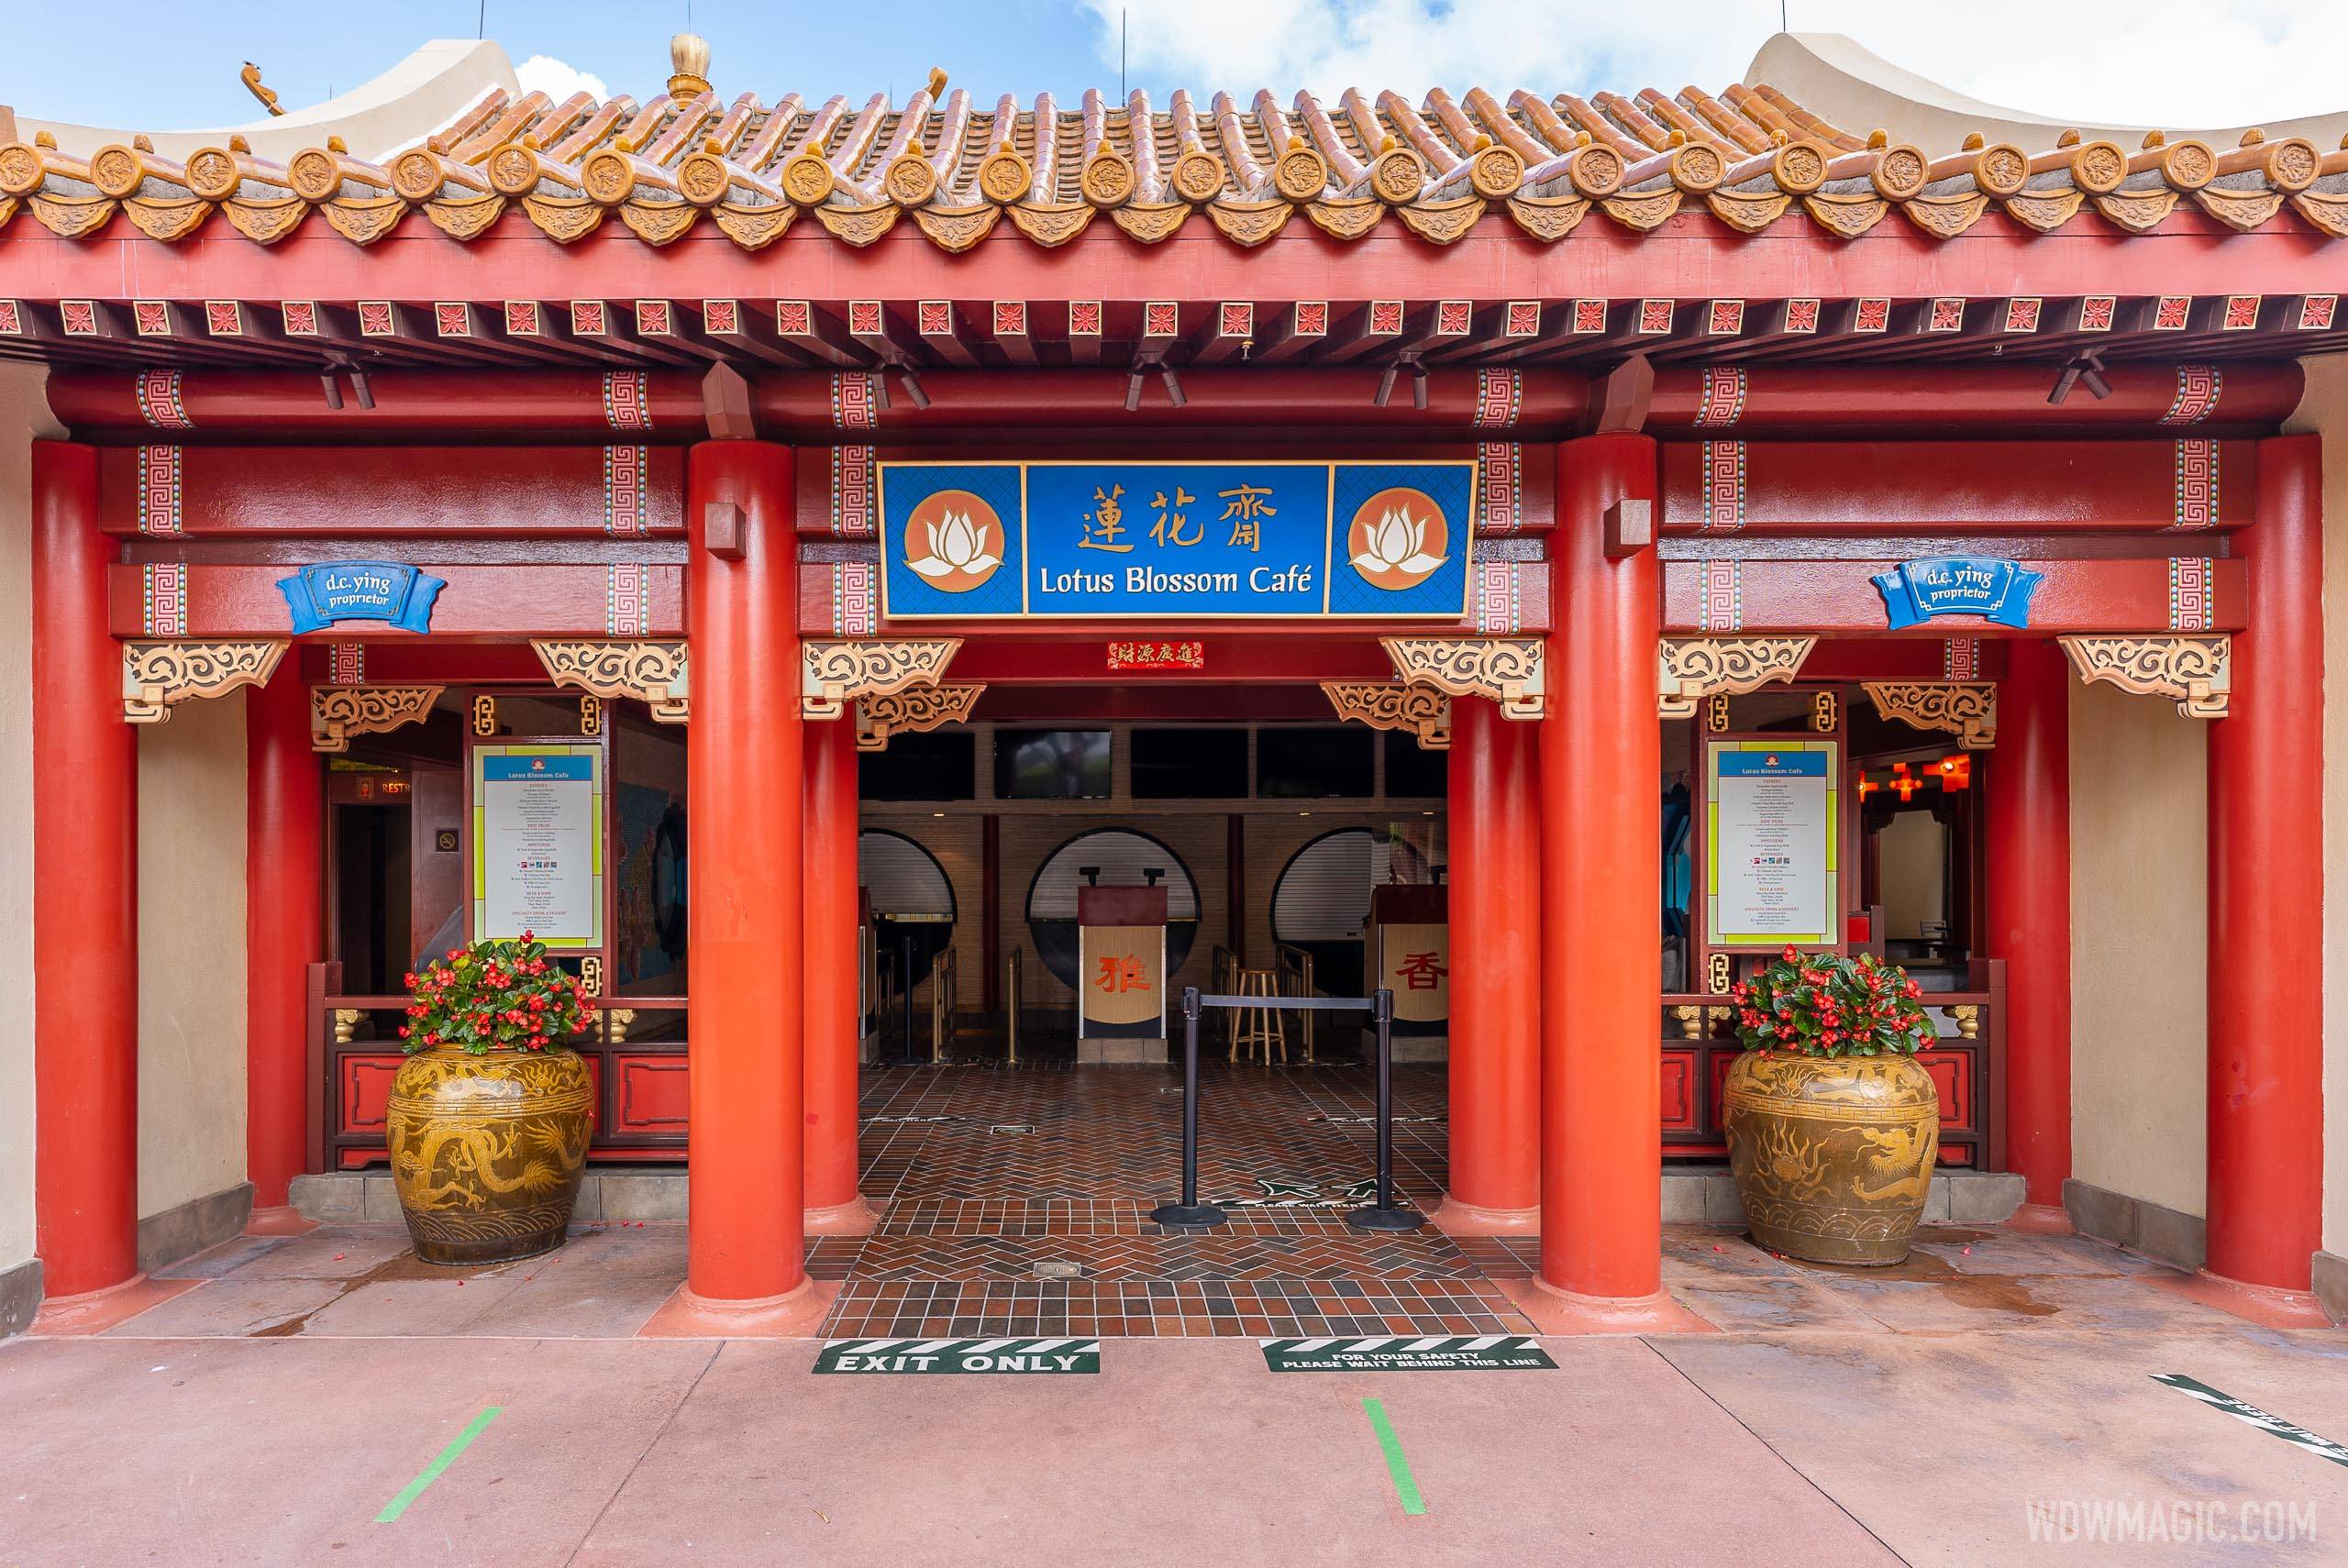 Lotus Blossom Cafe now open weekends in the China pavilion at EPCOT